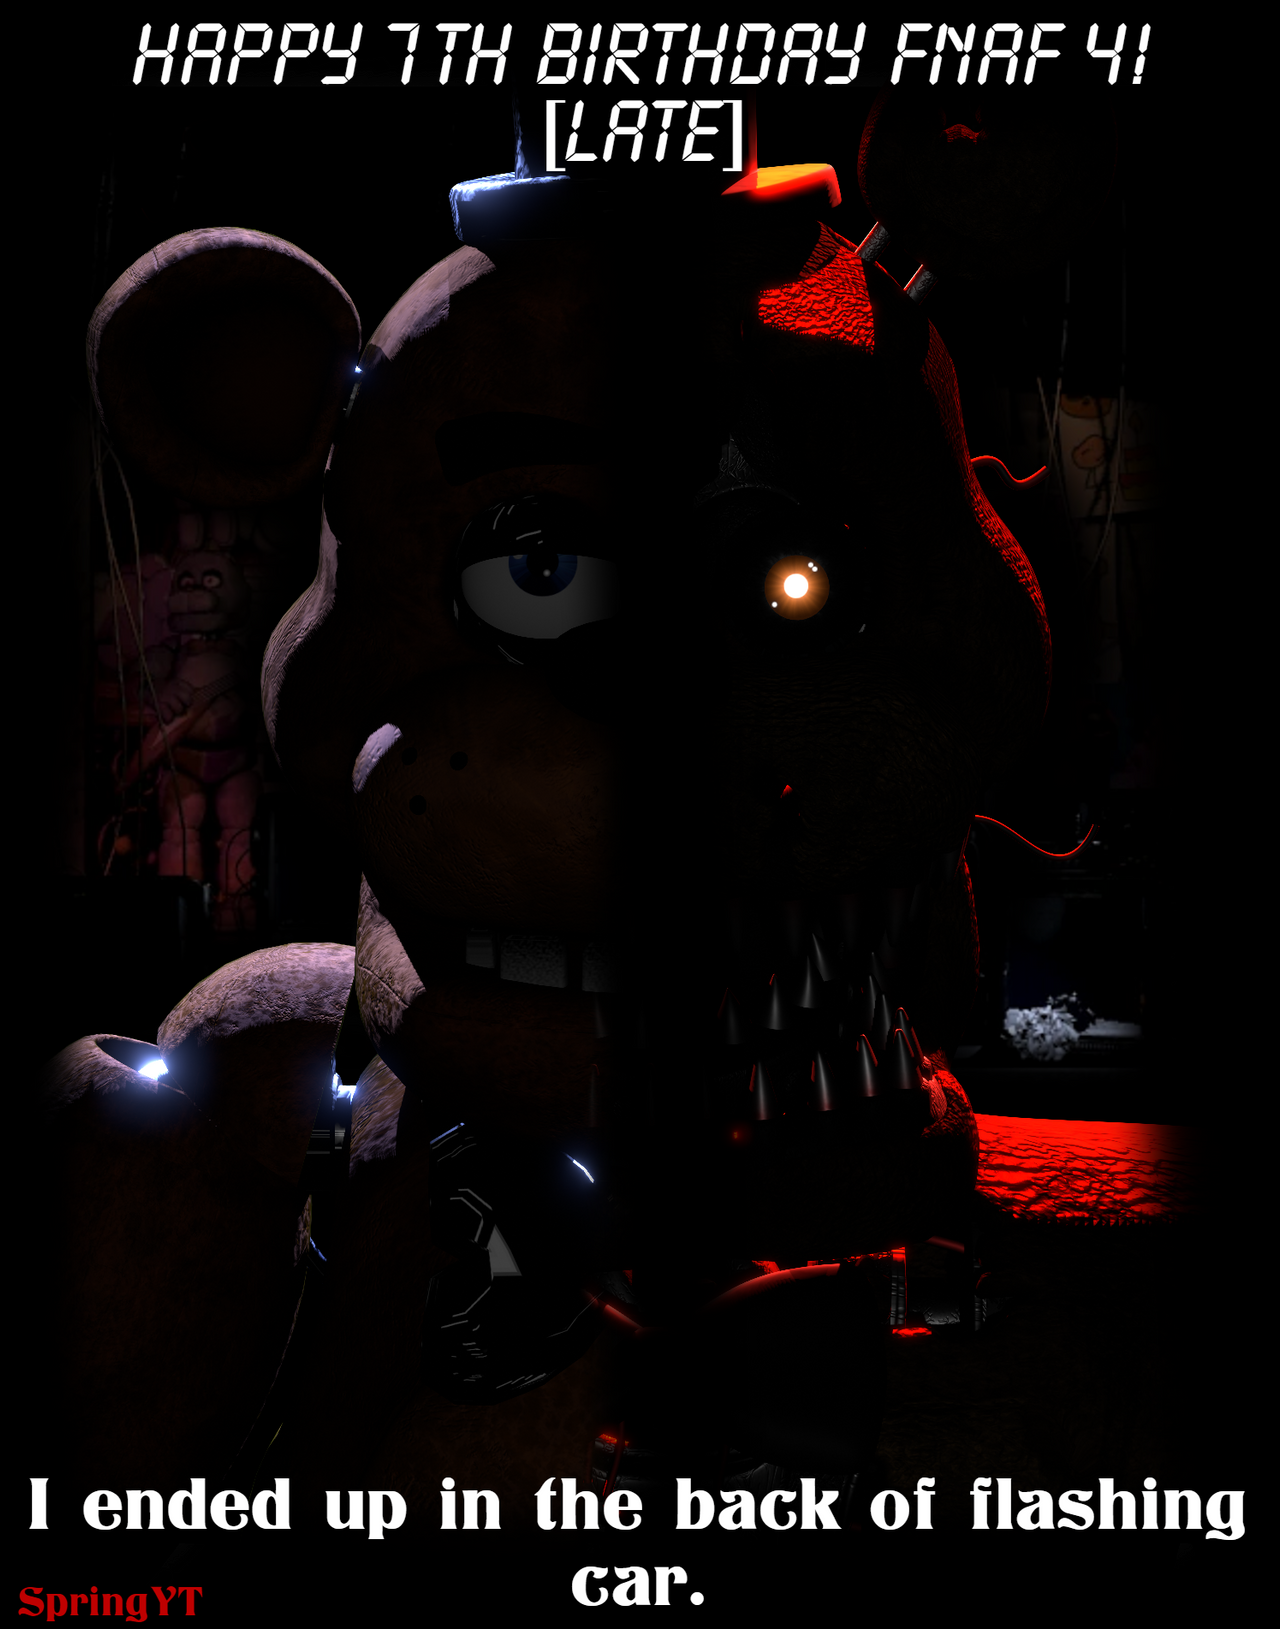 FNAFB0i on X: Happy 7th anniversary FNAF 3 - This render took so long to  make Took like 2 days to make it. Anyways Happy (late) FNAF 3 anniversary  everyone. I really